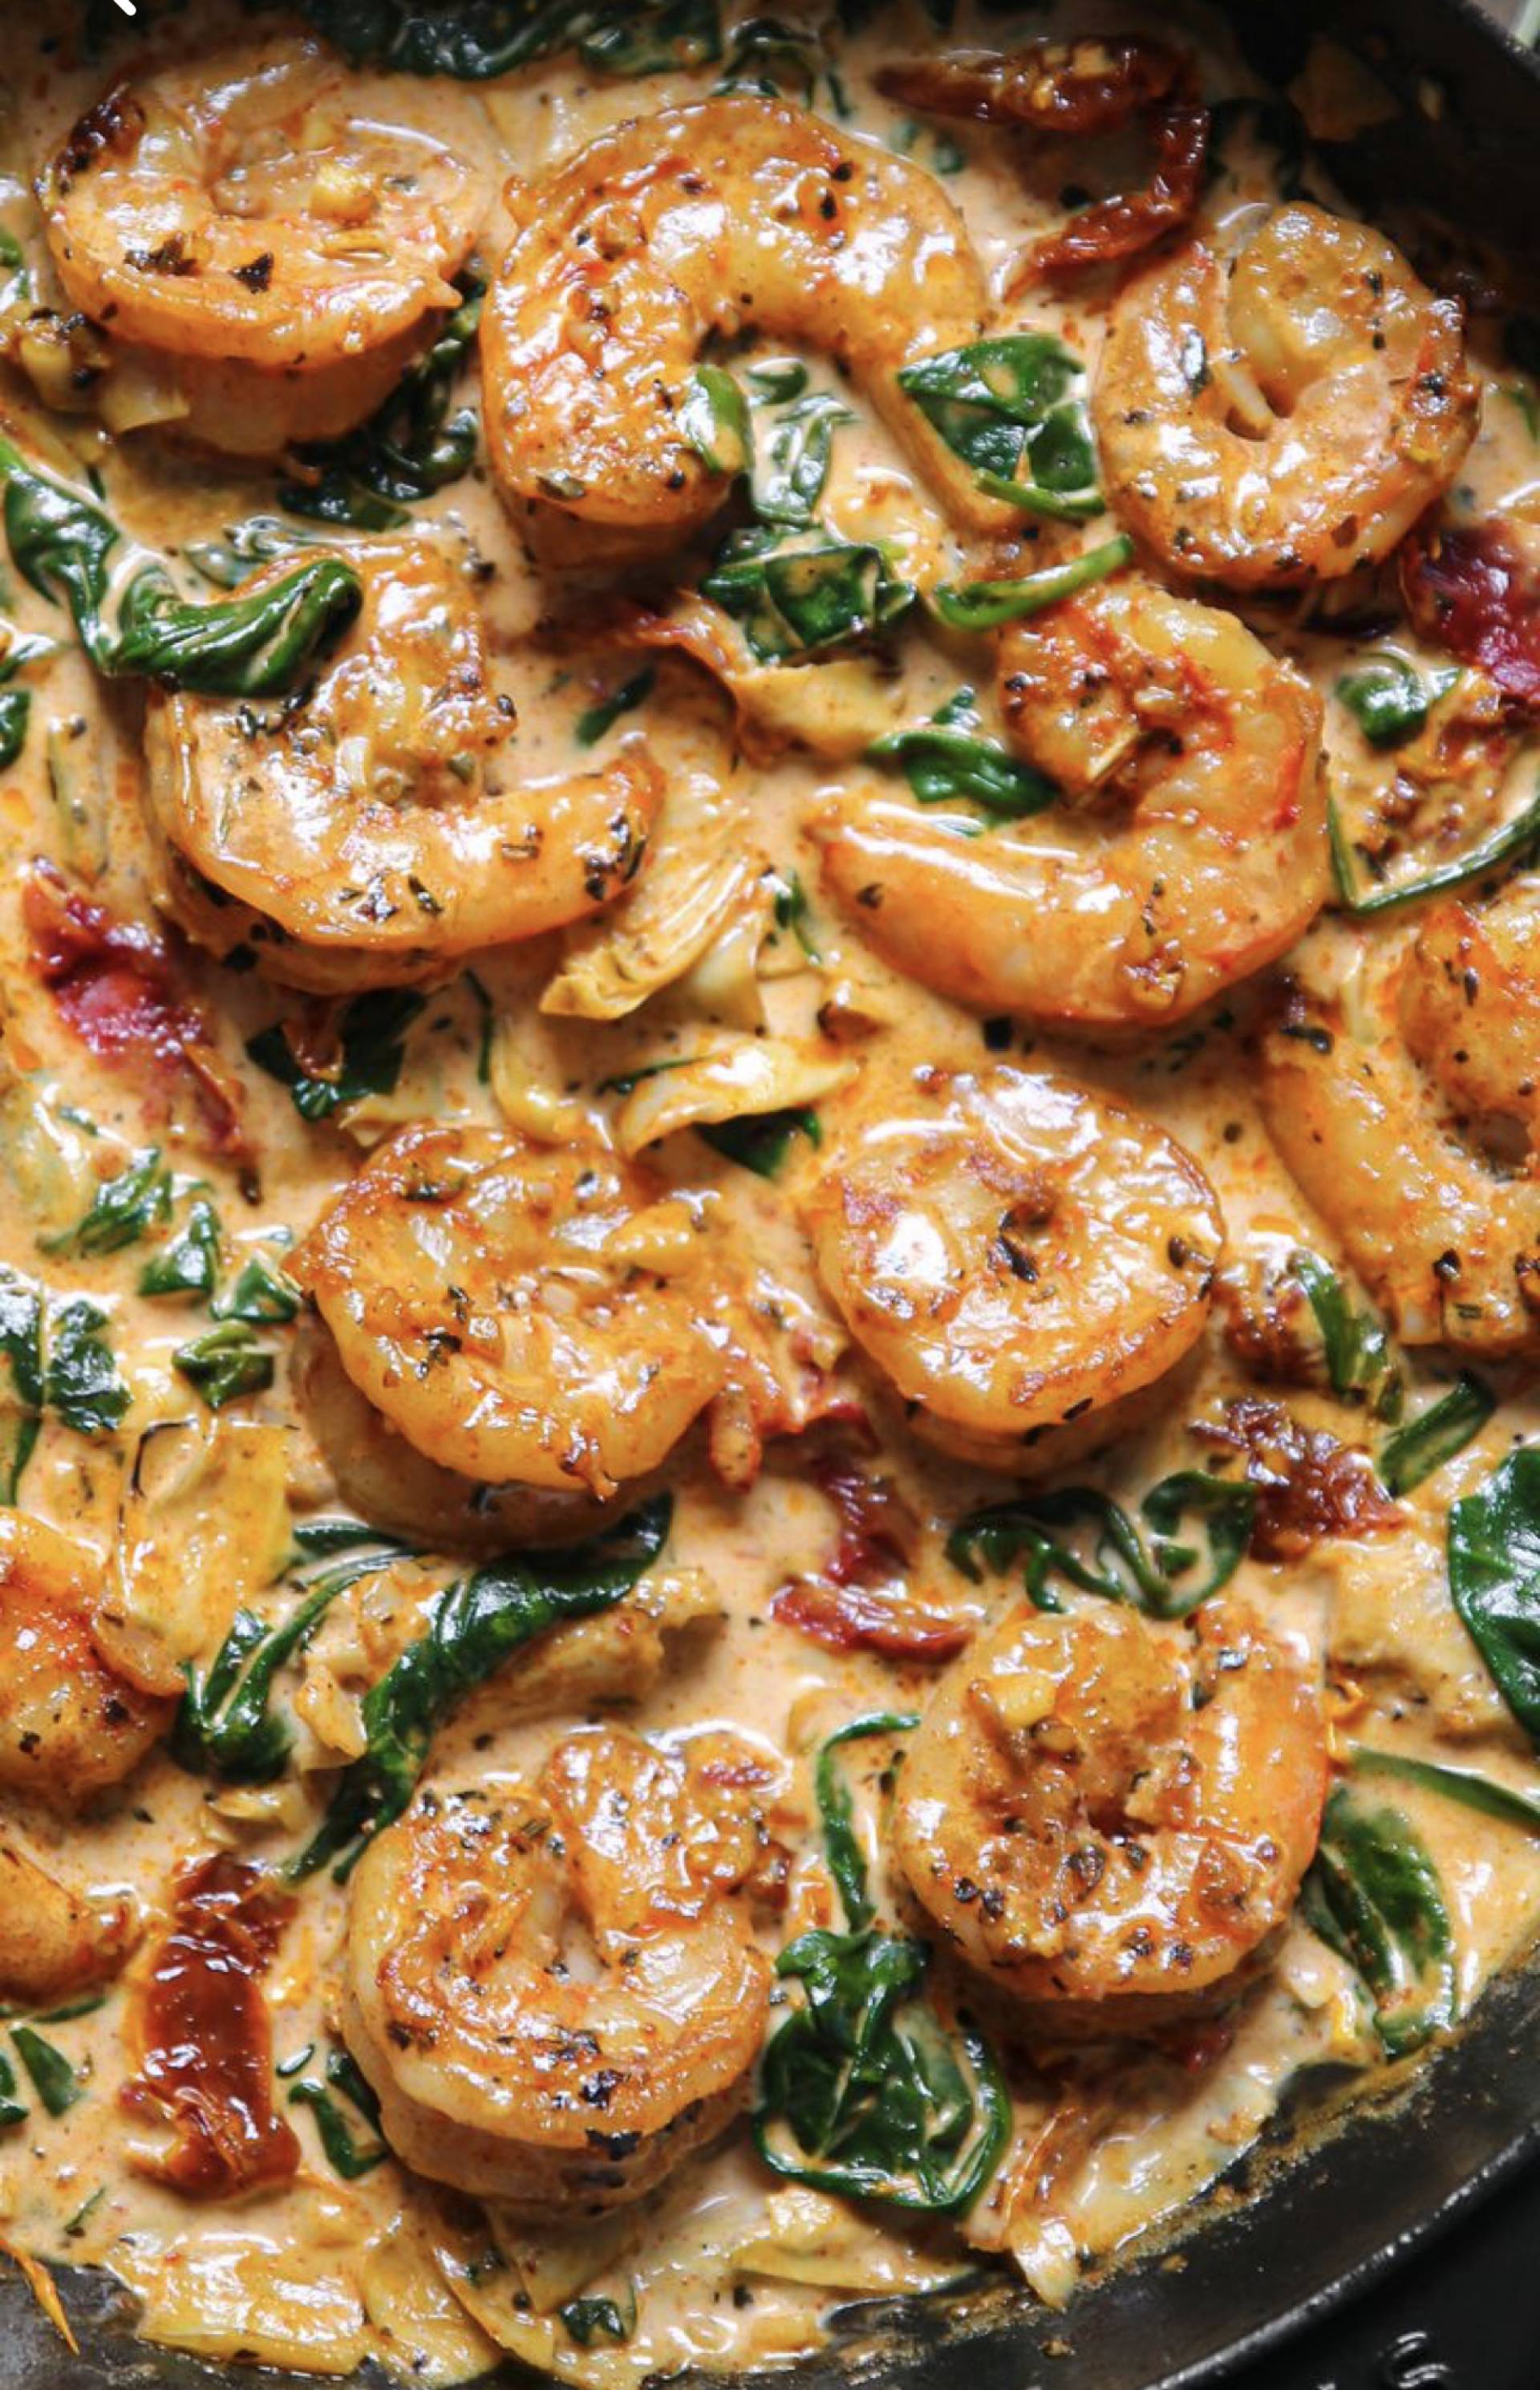 Shrimp in a Tuscan Kiss